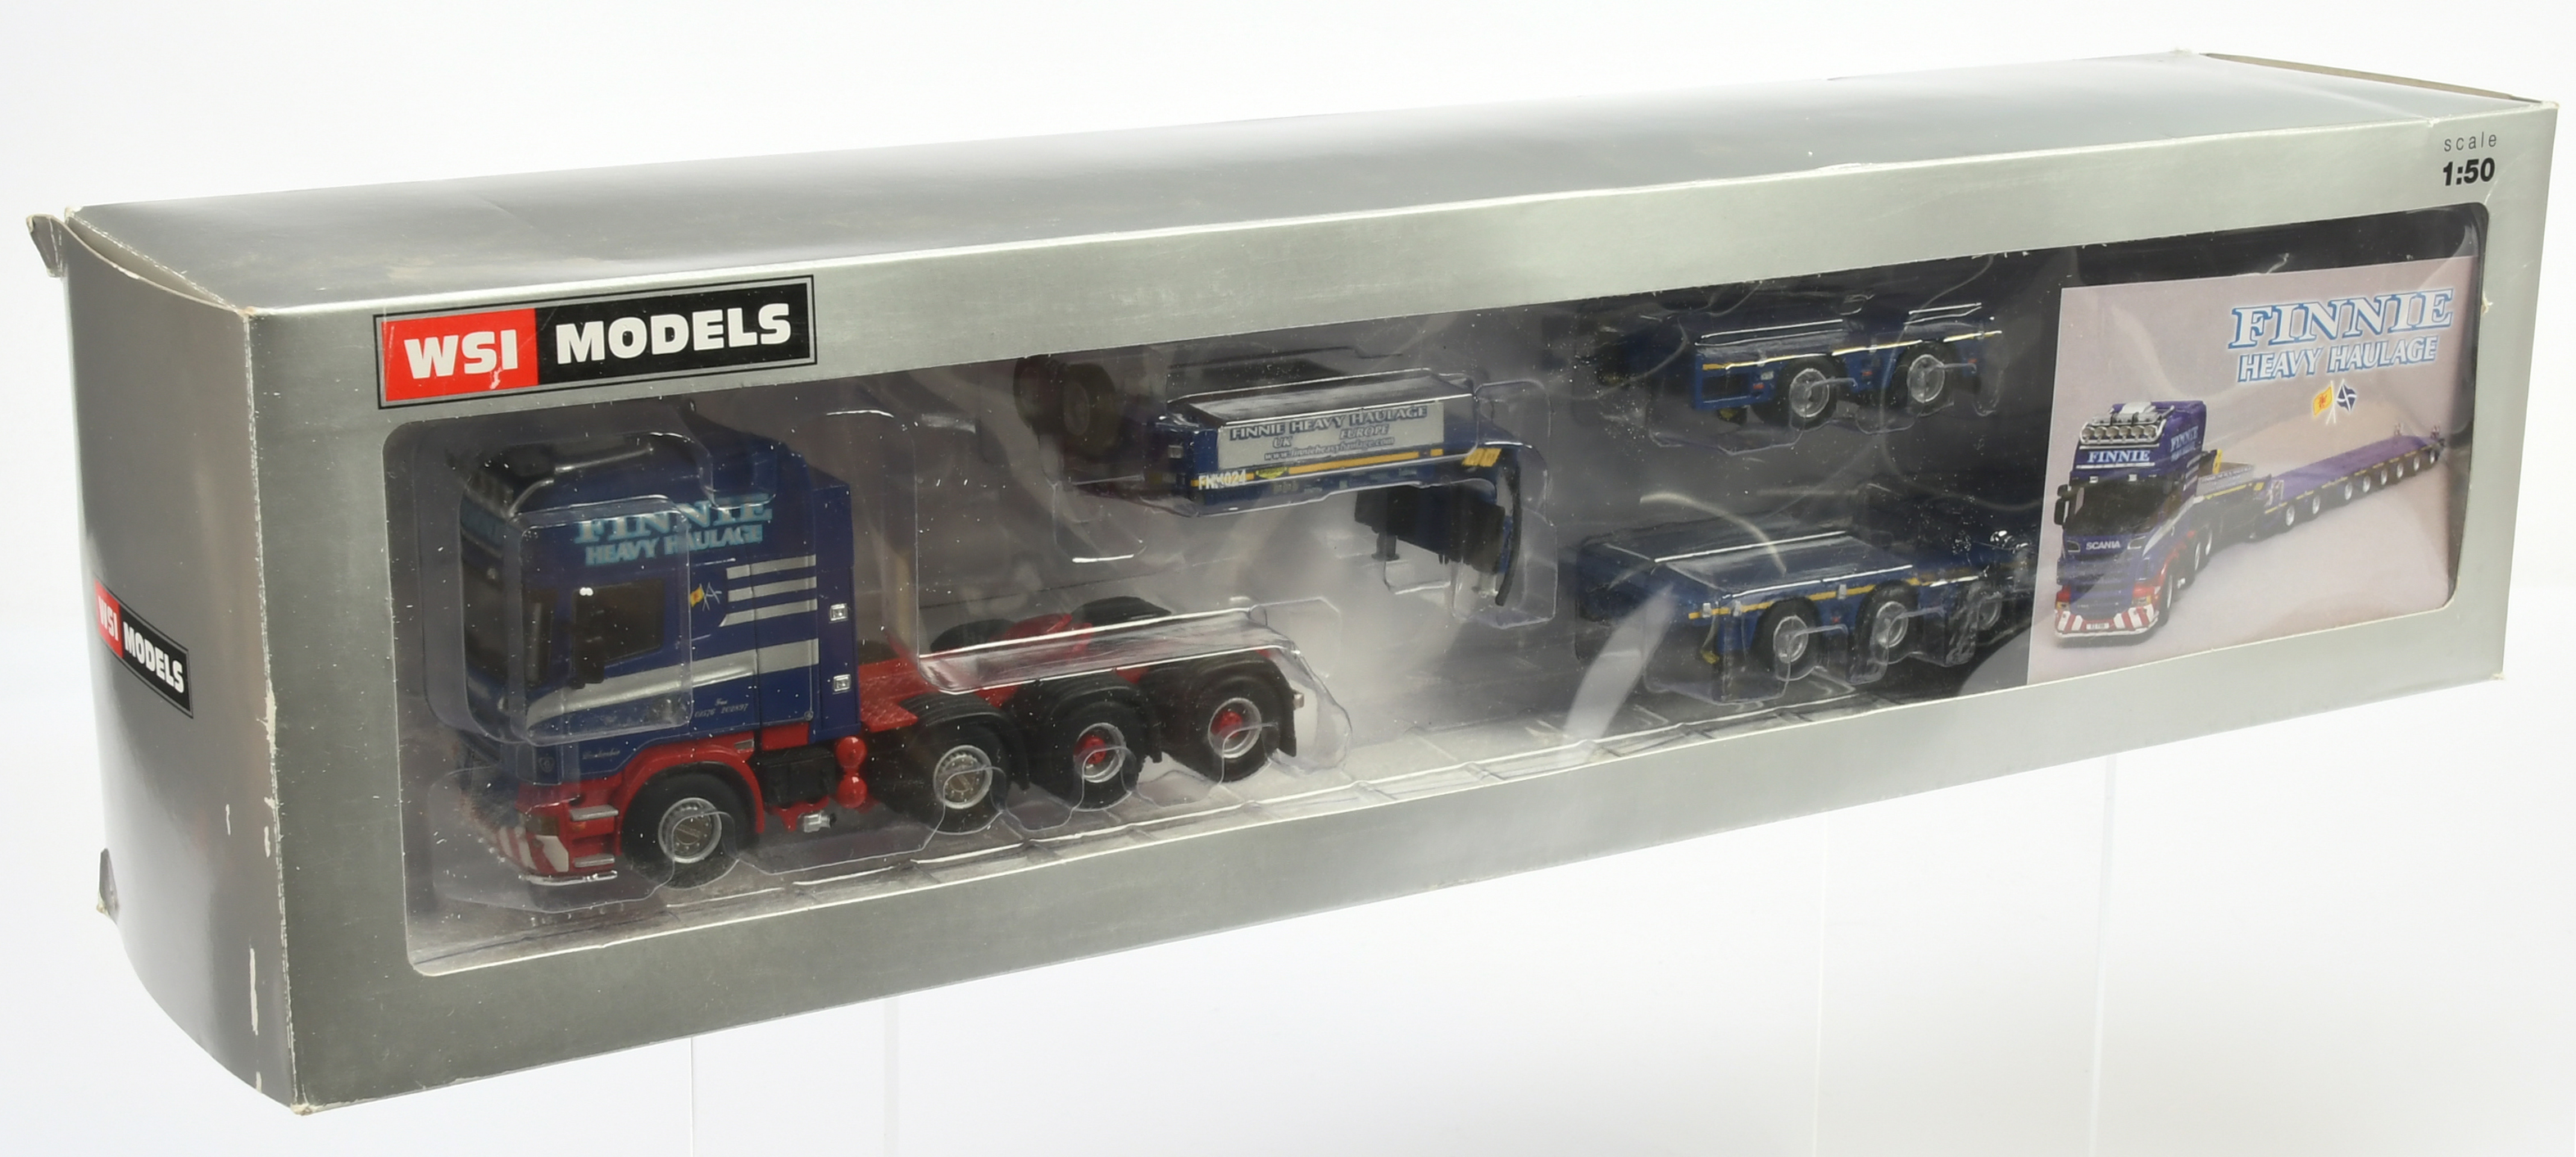 WSI Models (1/50th) 02-1674 Scania R6 Topline "Alan Finnie" - Blue, red and yellow  with certific...